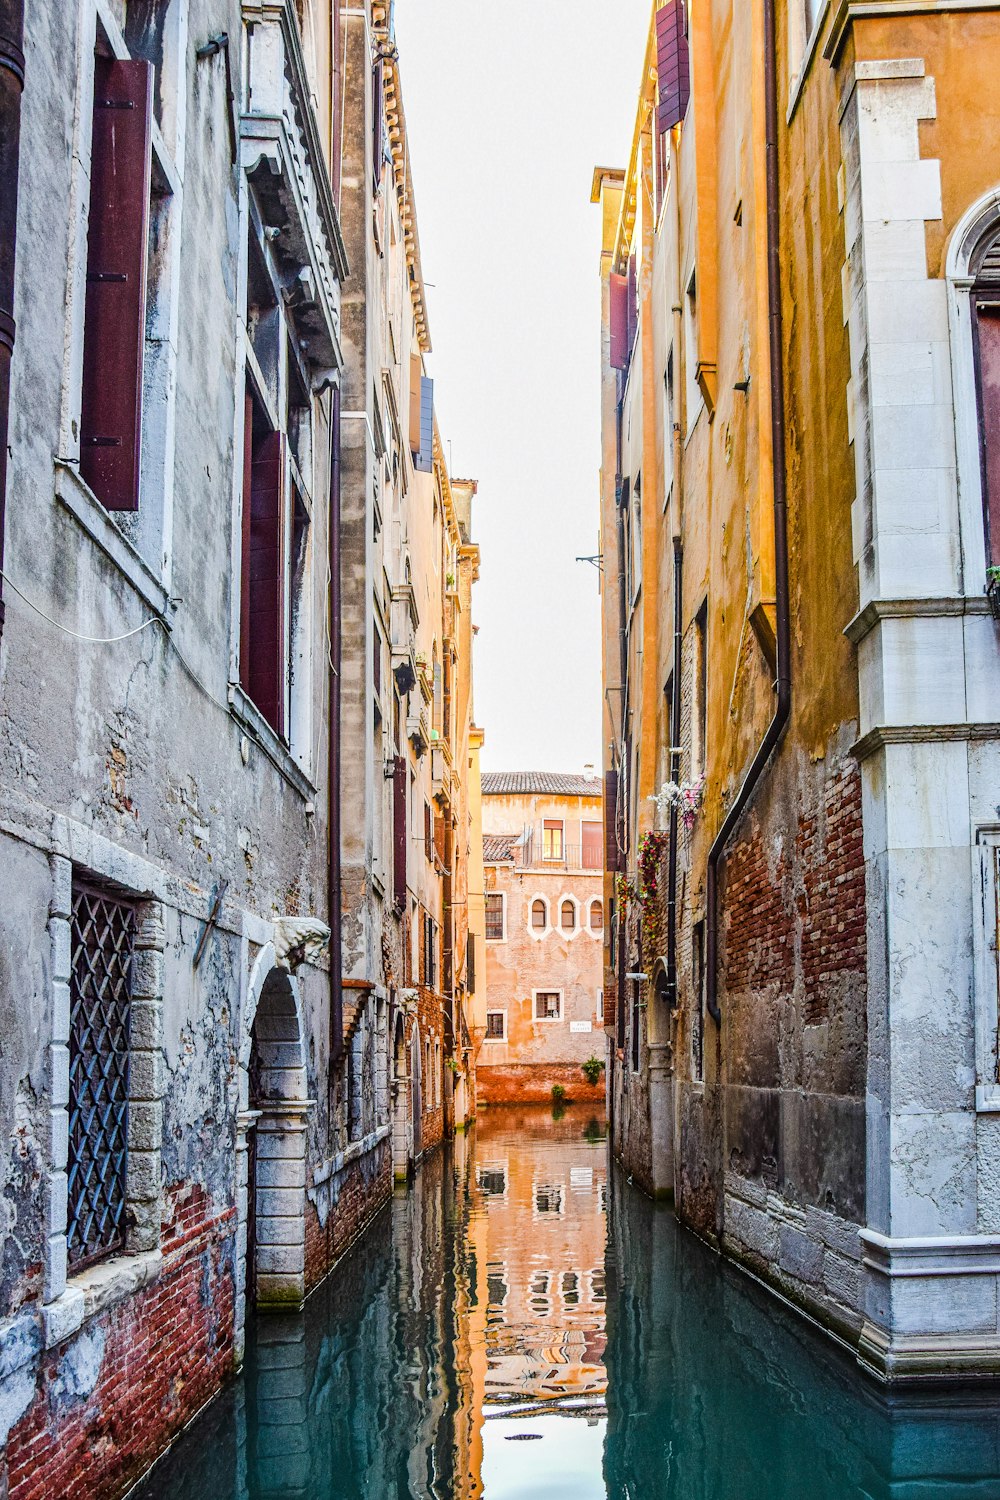 A narrow canal runs between two buildings in venice photo – Free Italy  Image on Unsplash